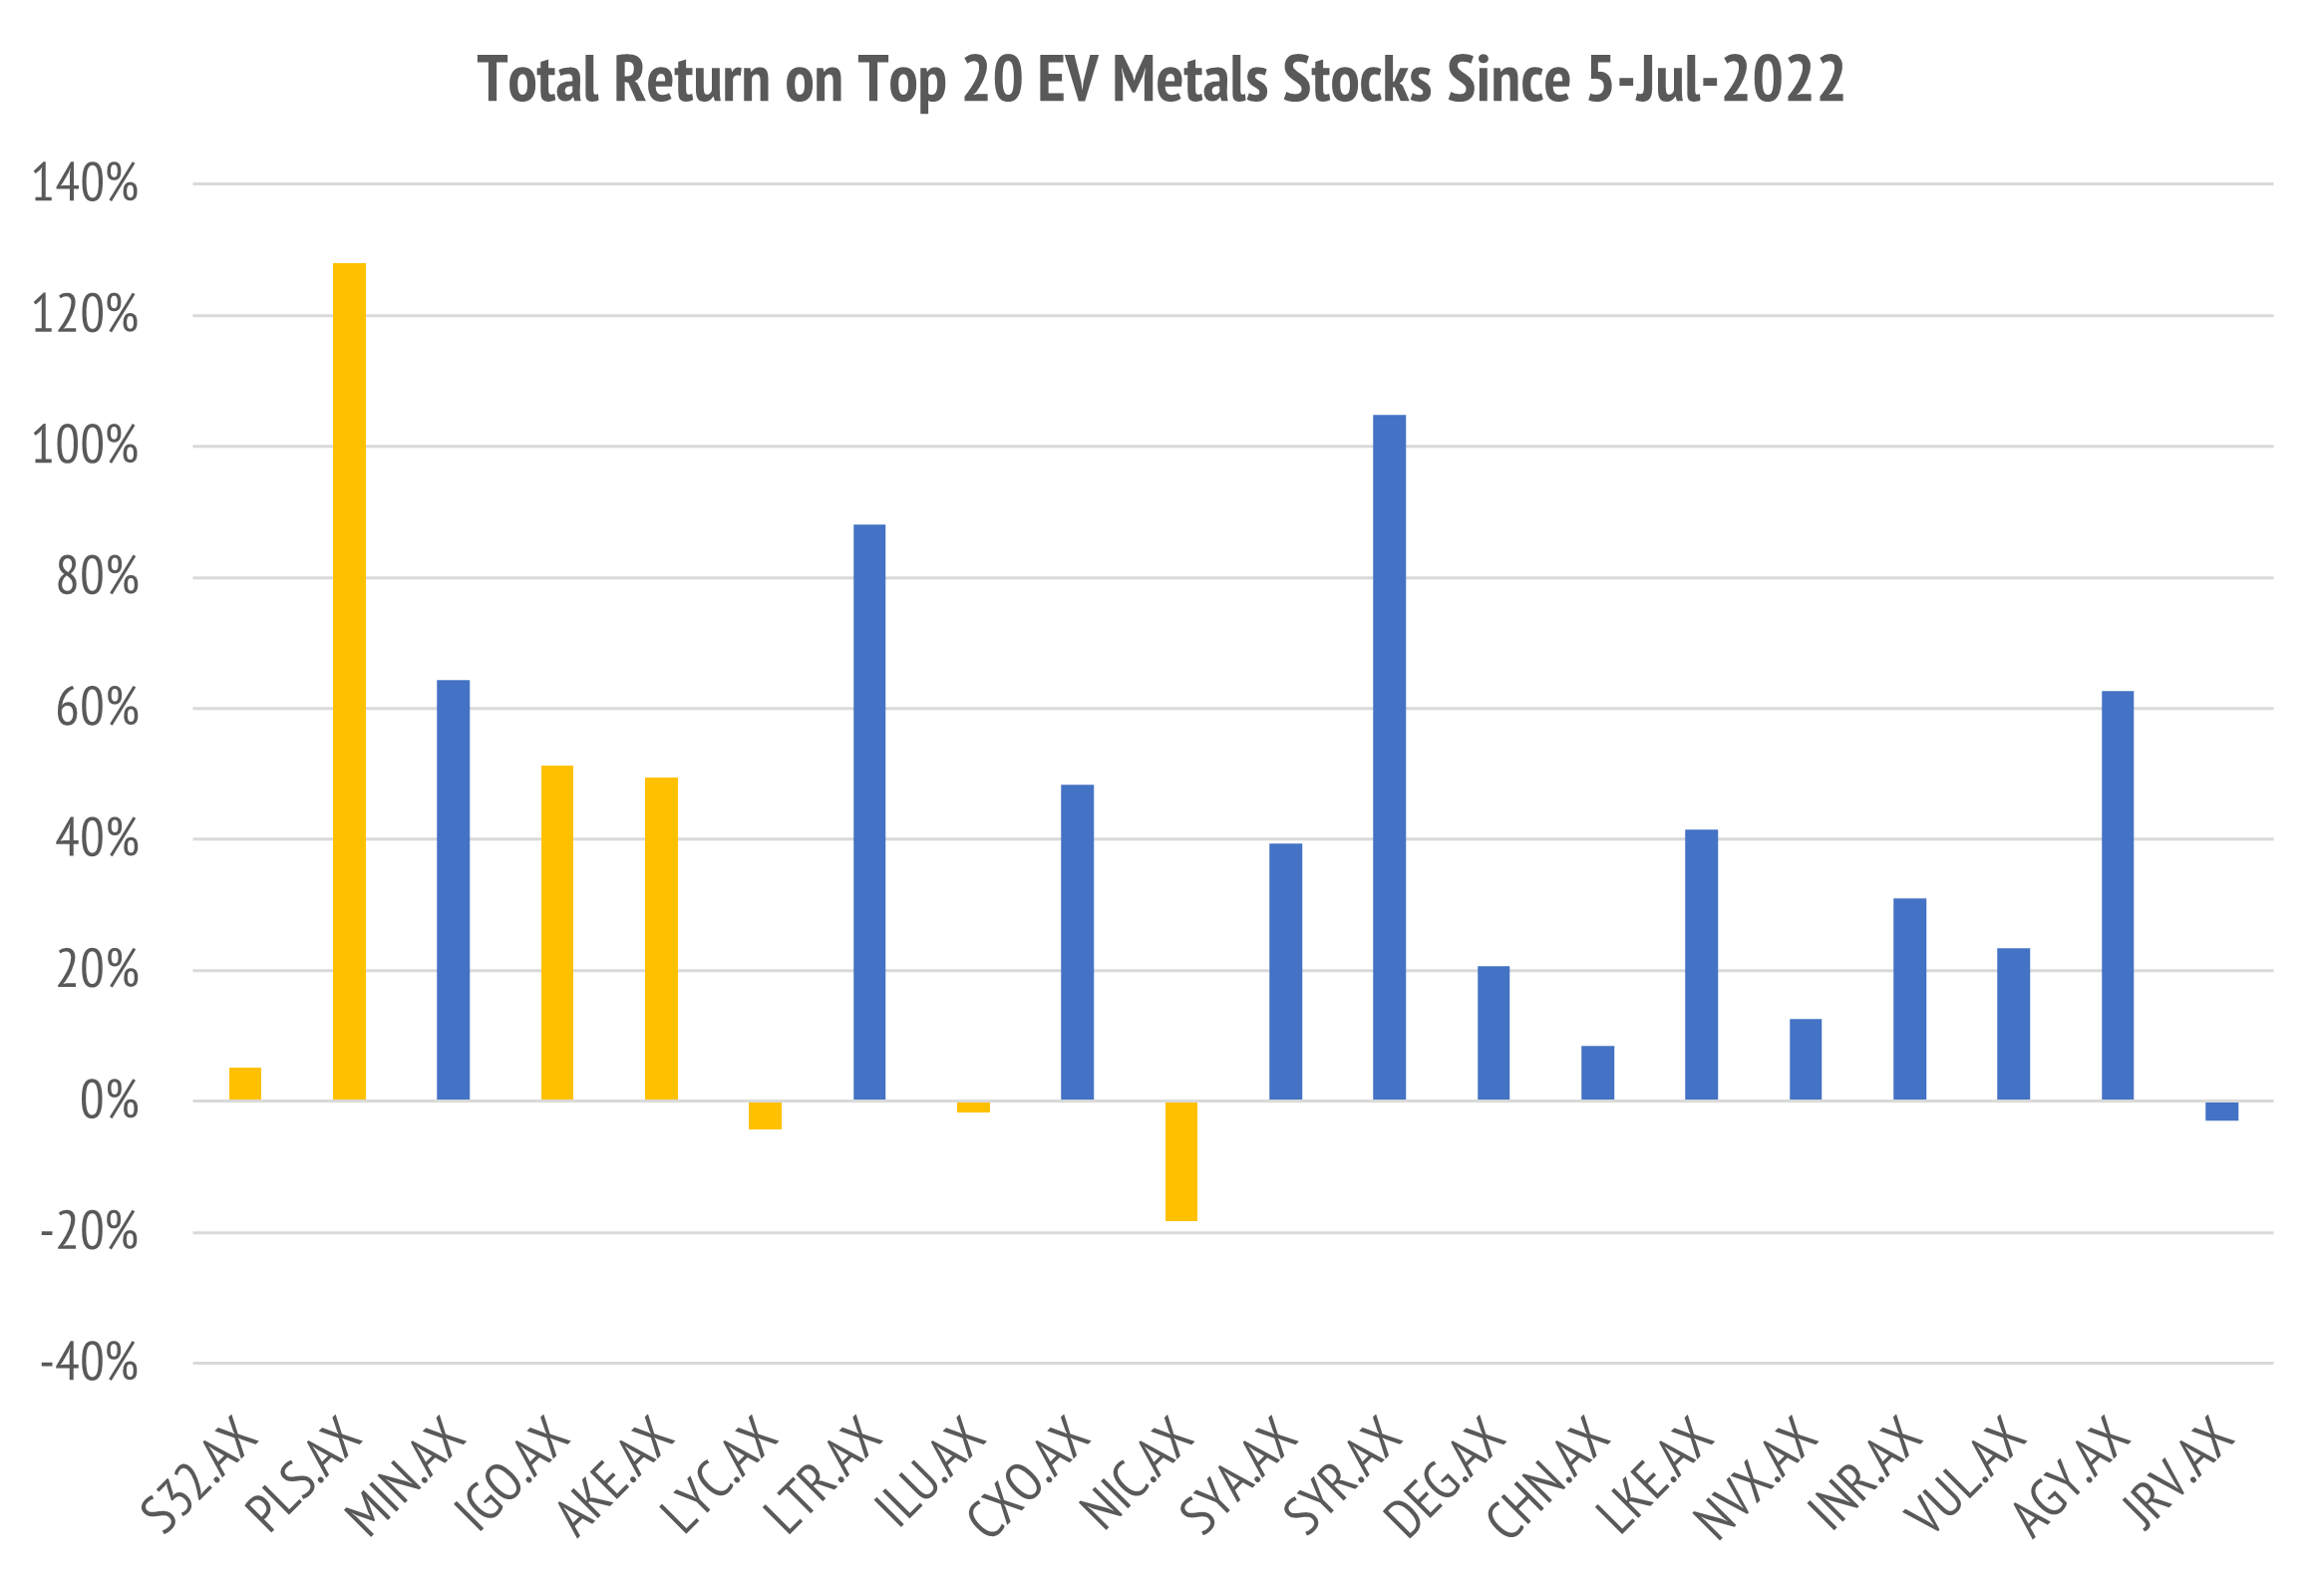 Exhibit 1: Total
return of Top 20 EV Metals Stocks with prior “Magnificent Seven” marked
in orange.